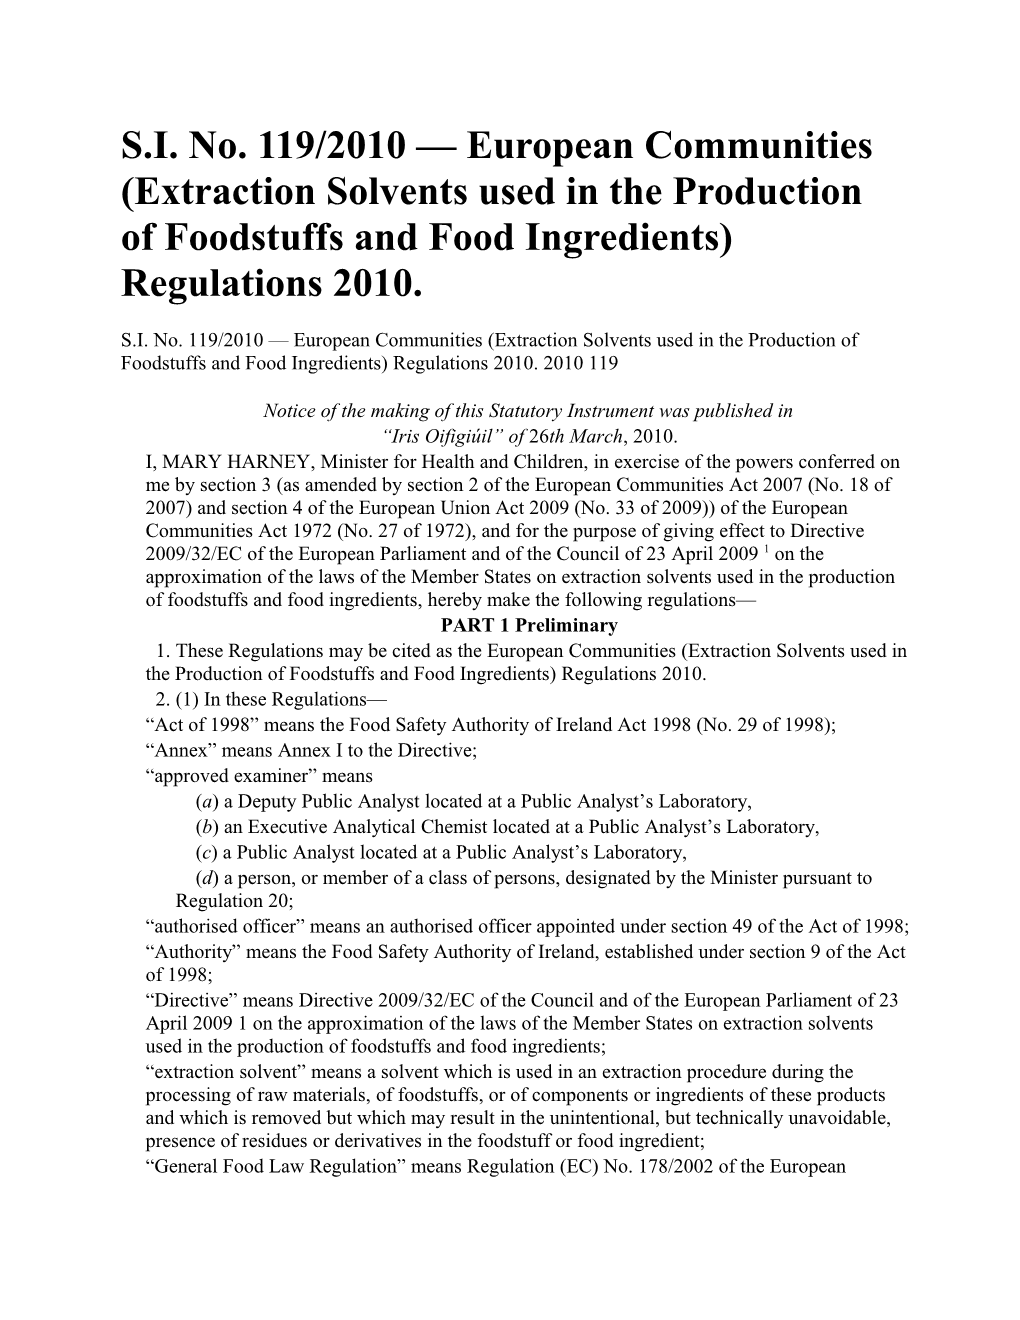 S.I. No. 119/2010 European Communities (Extraction Solvents Used in the Production Of